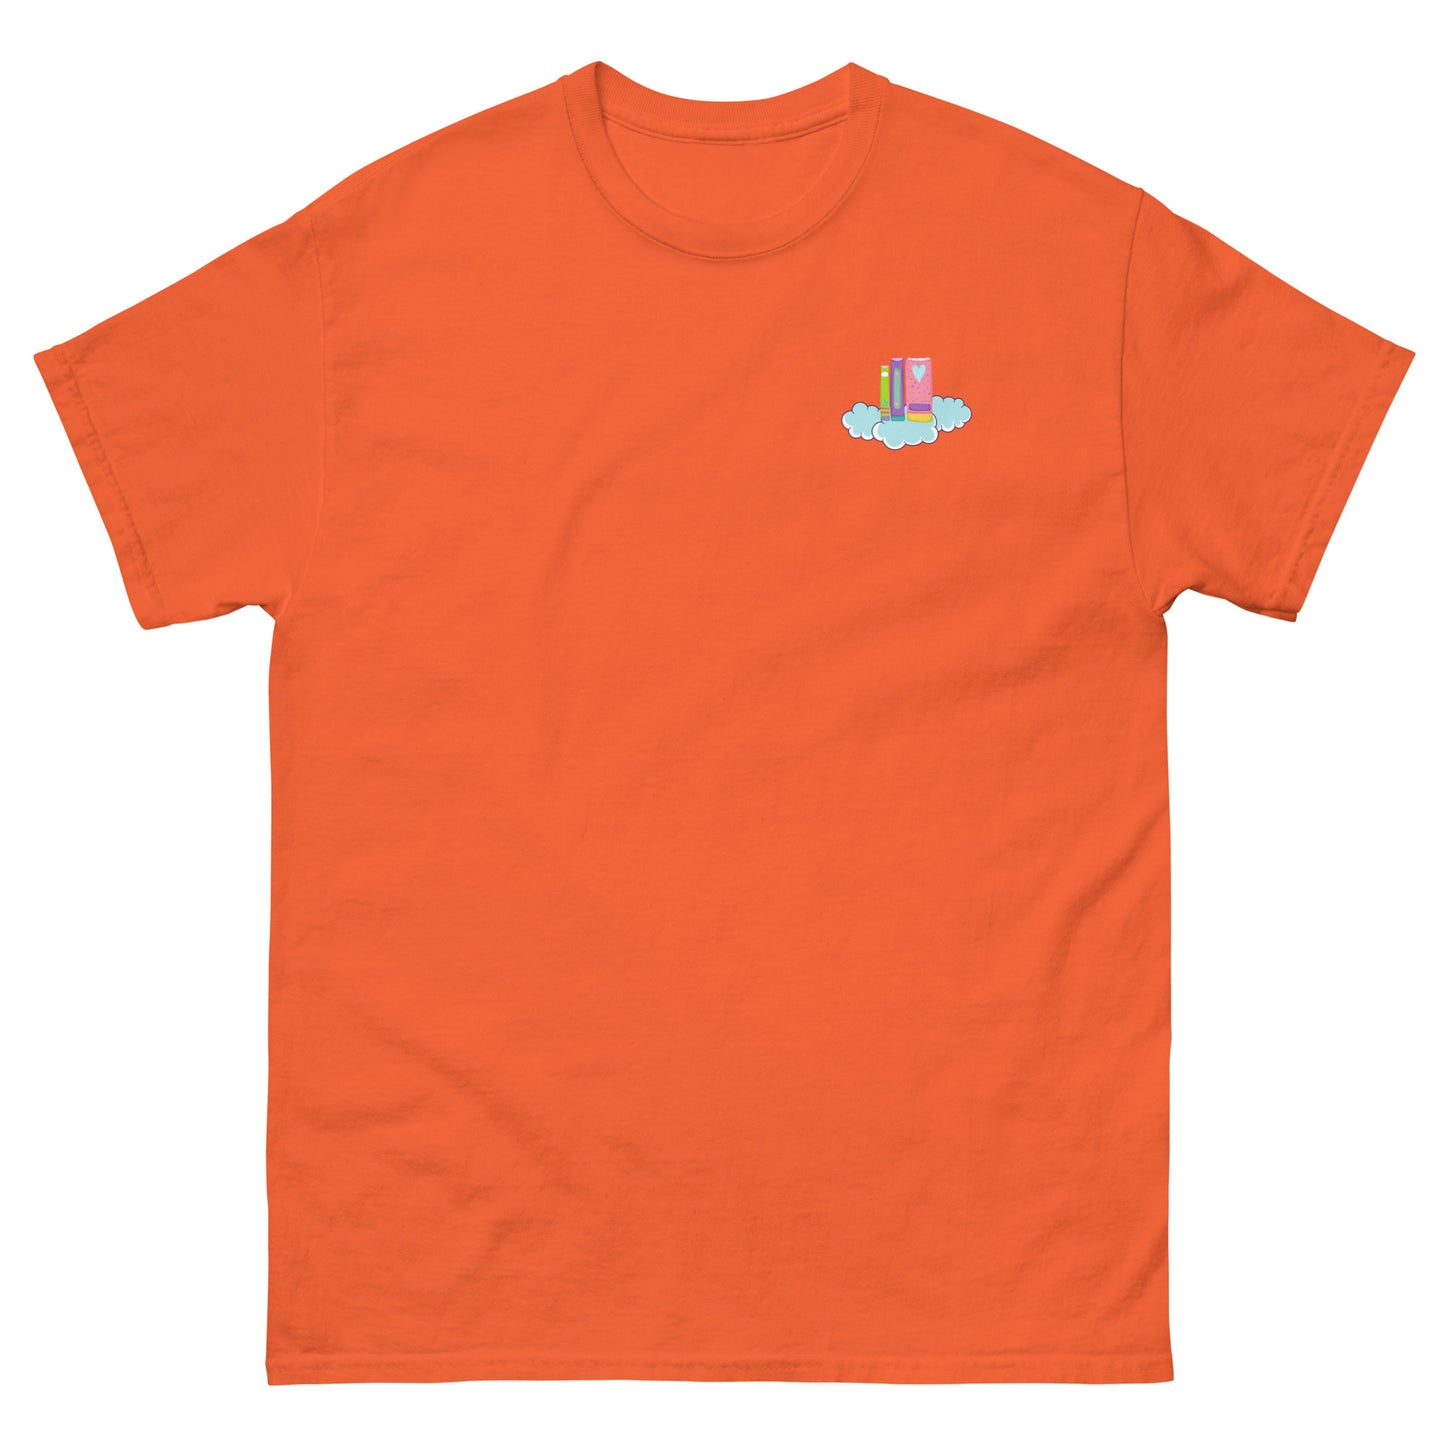 Join a Gang Book Club Gildan classic tee - Ghostly Tails